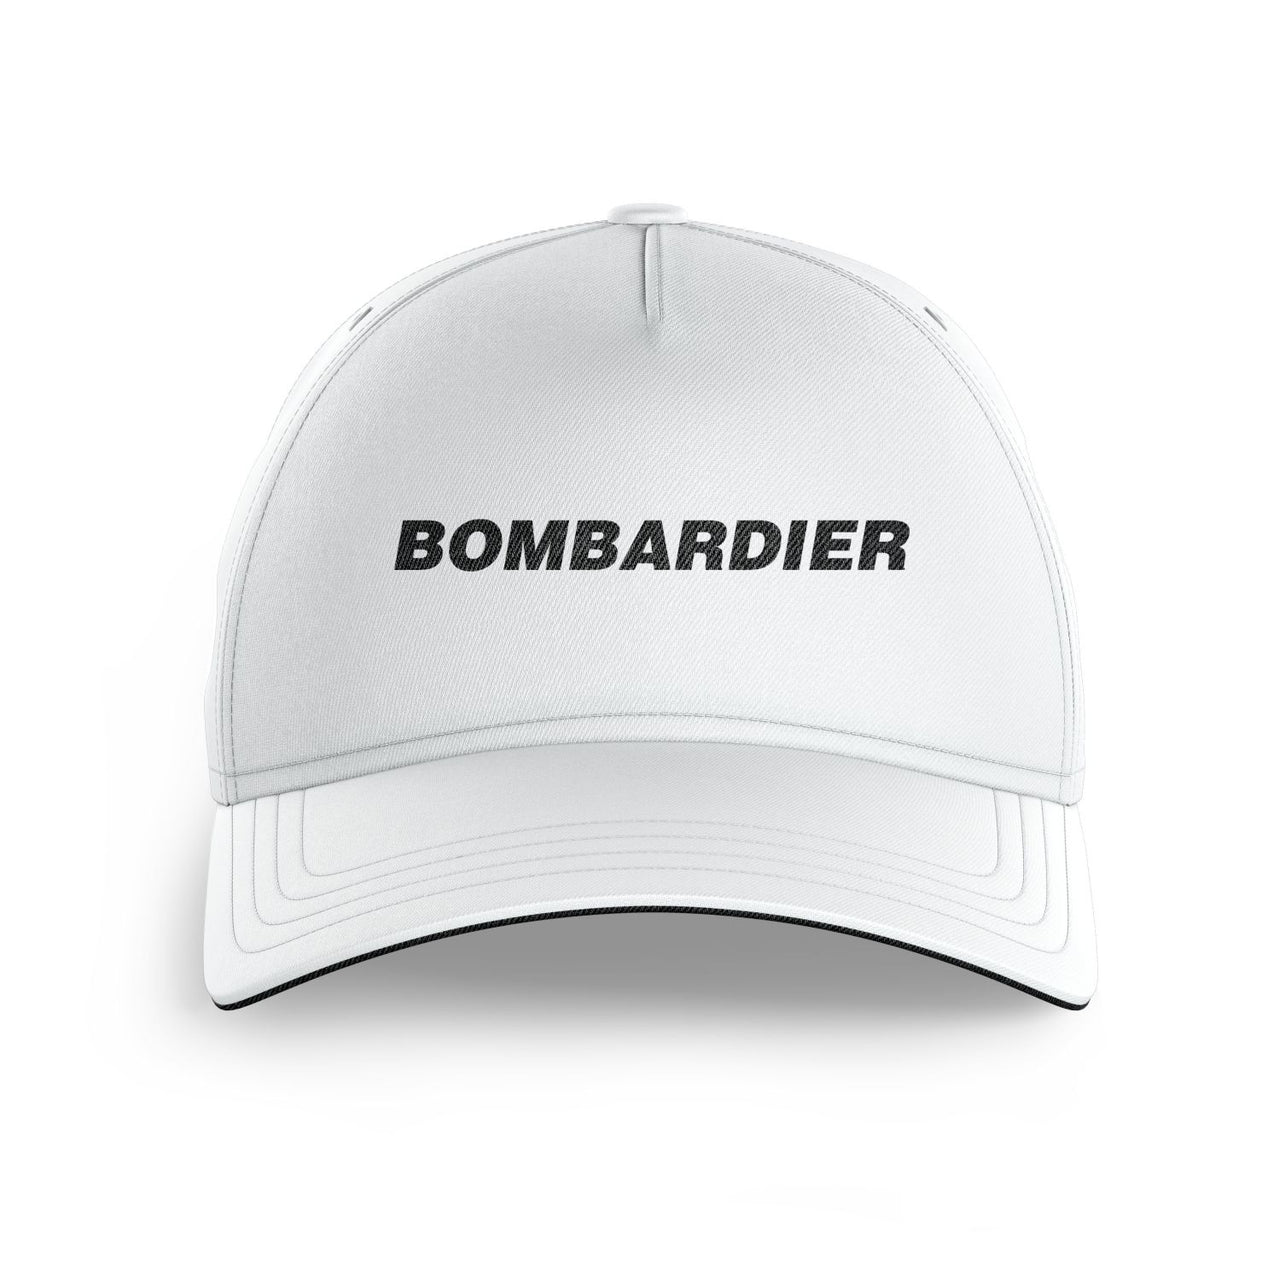 Bombardier & Text Printed Hats